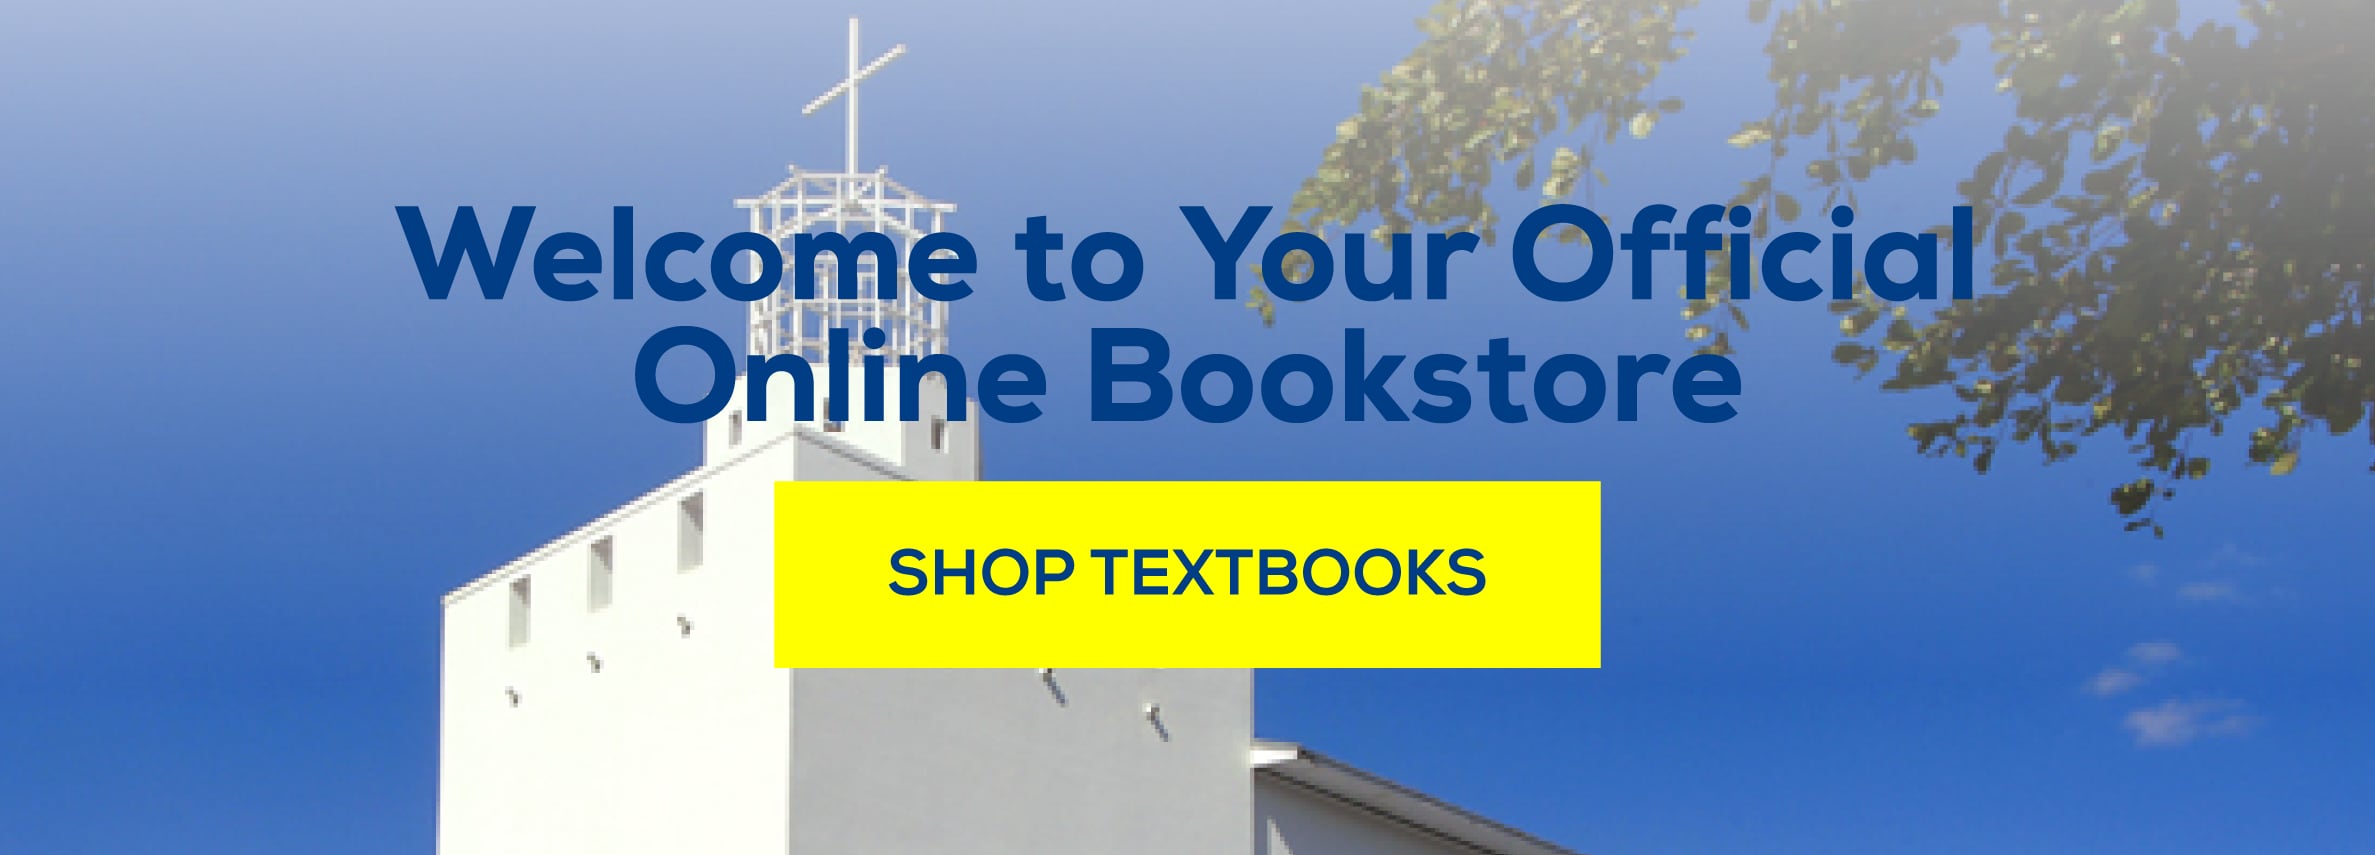 Welcome to your official online bookstore. Shop textbooks